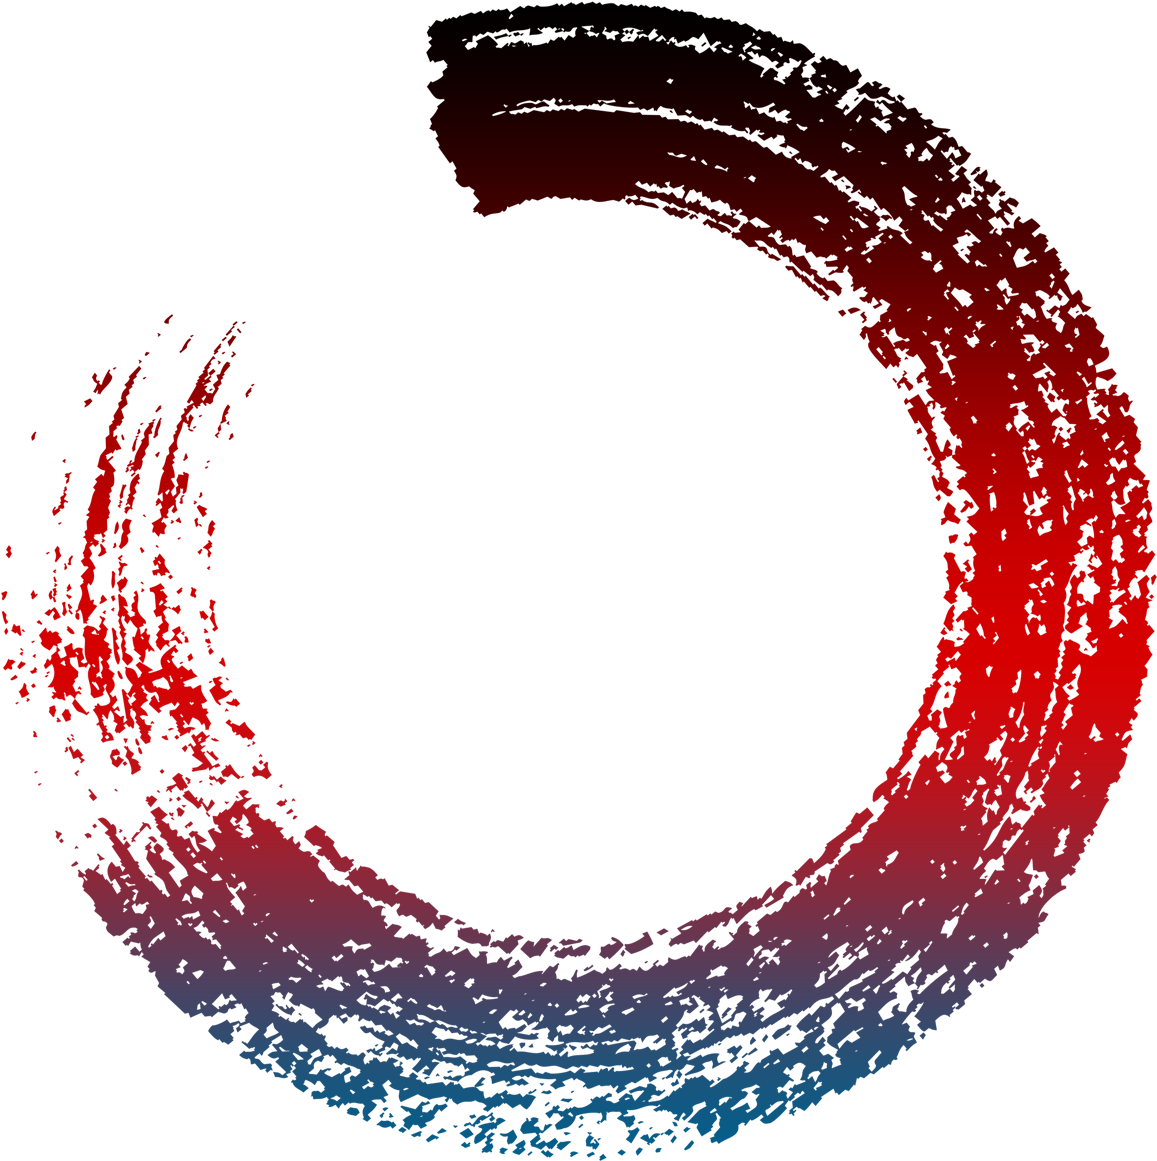 A Red And Blue Circle